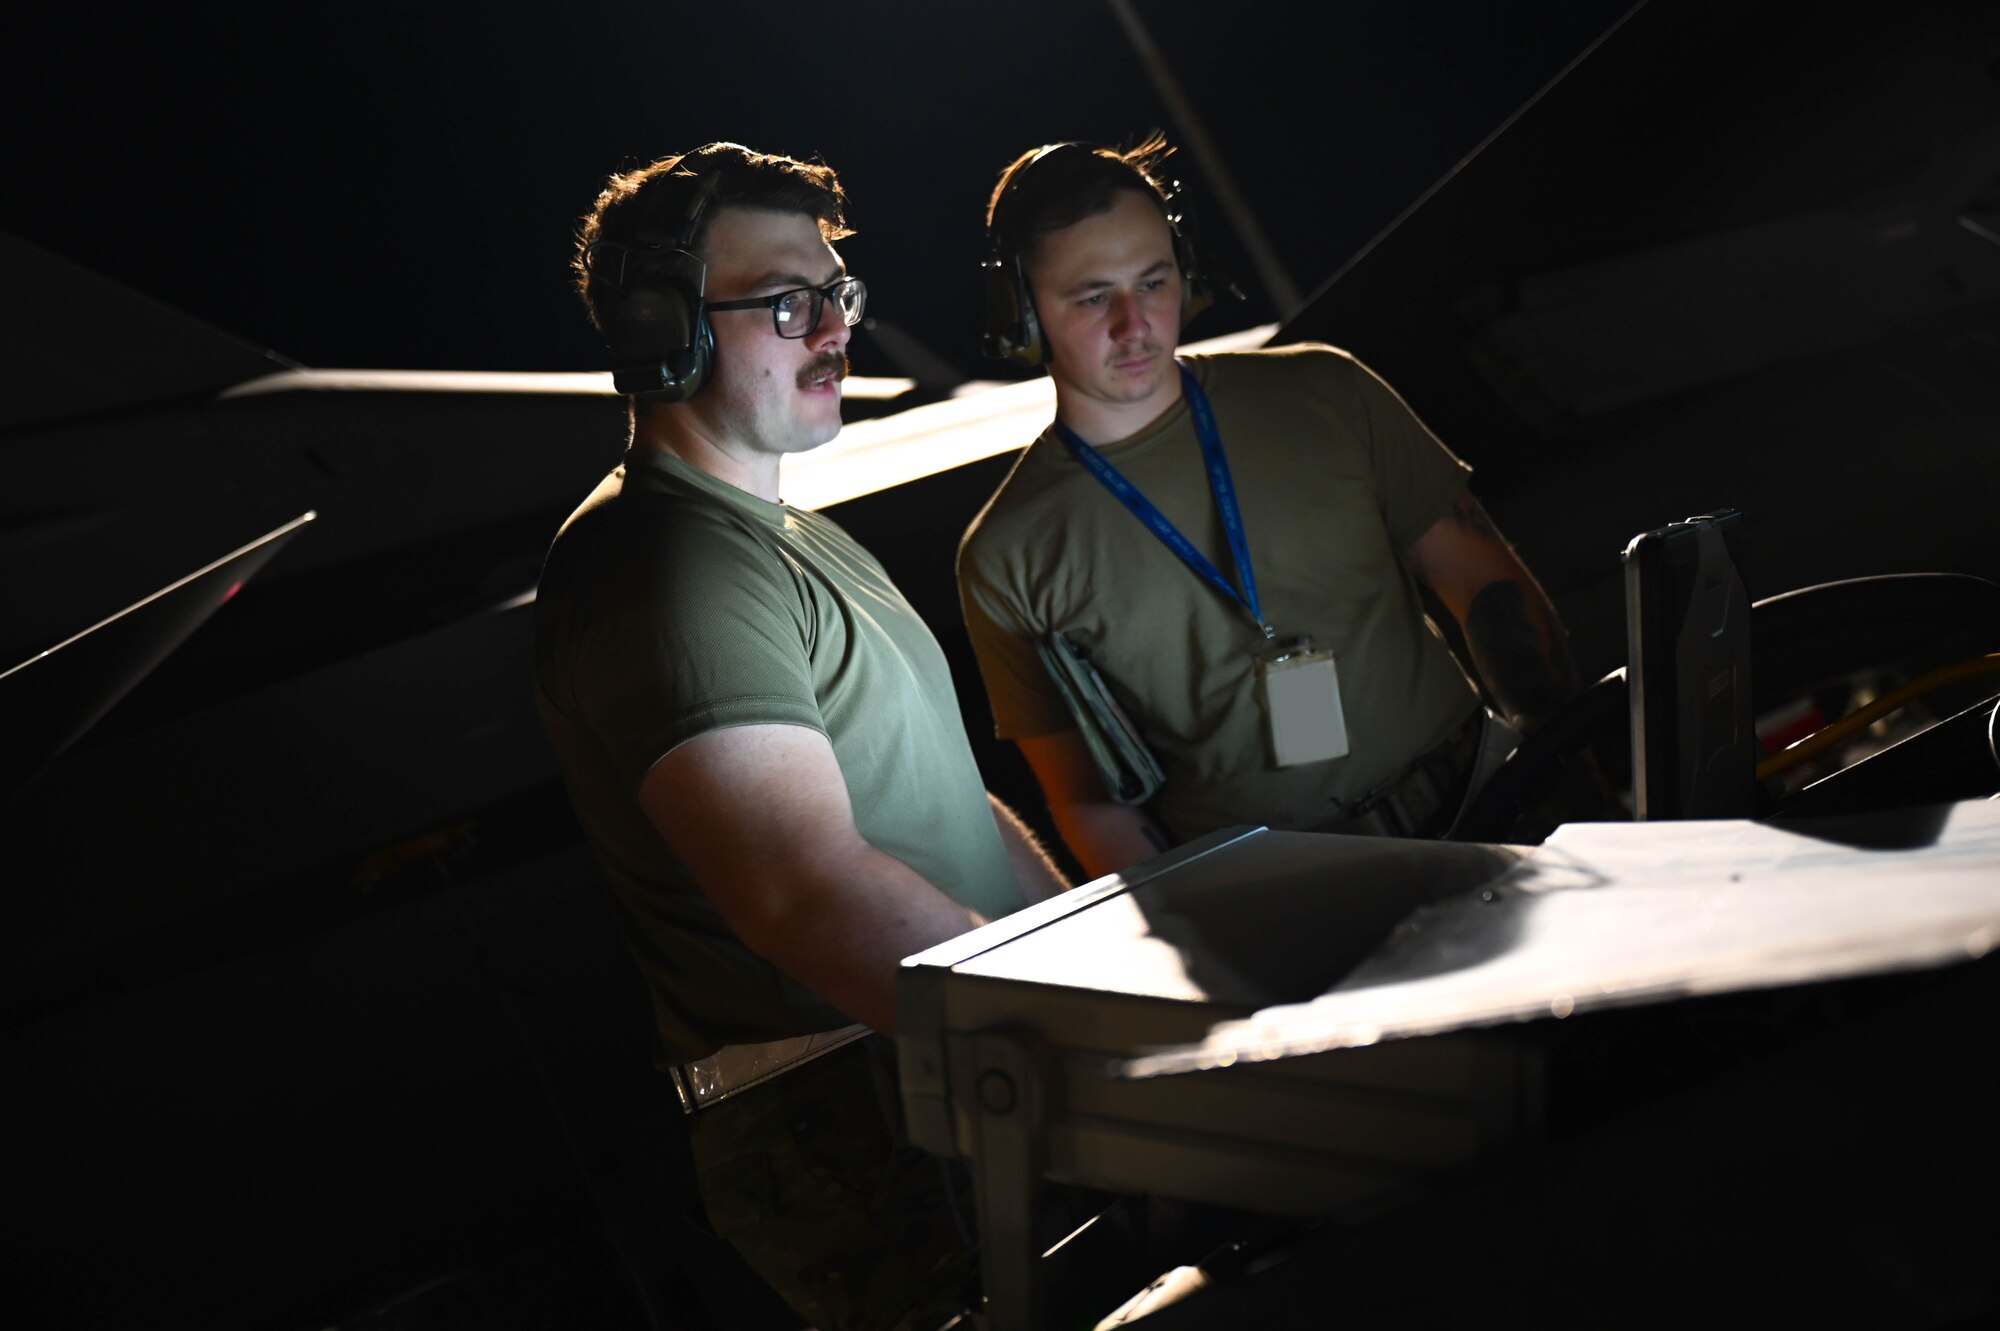 U.S. Air Force Staff Sgt. Daniel Rosser, 87th Electronic Warfare Squadron COMBAT SHIELD avionics electronic warfare journeyman, left, and U.S. Air Force William Staff Sgt. William Price, 87th EWS COMBAT SHIELD avionics electronic warfare journeyman, right, evaluate results from an electronic warfare assessment at Nellis Air Force Base, Nev., July 14, 2023. COMBAT SHIELD was conducted during Red Flag 23-3 as part of a required assessment of the Combat Air Force’s platforms. (U.S. Air Force photo by Capt. Benjamin Aronson)